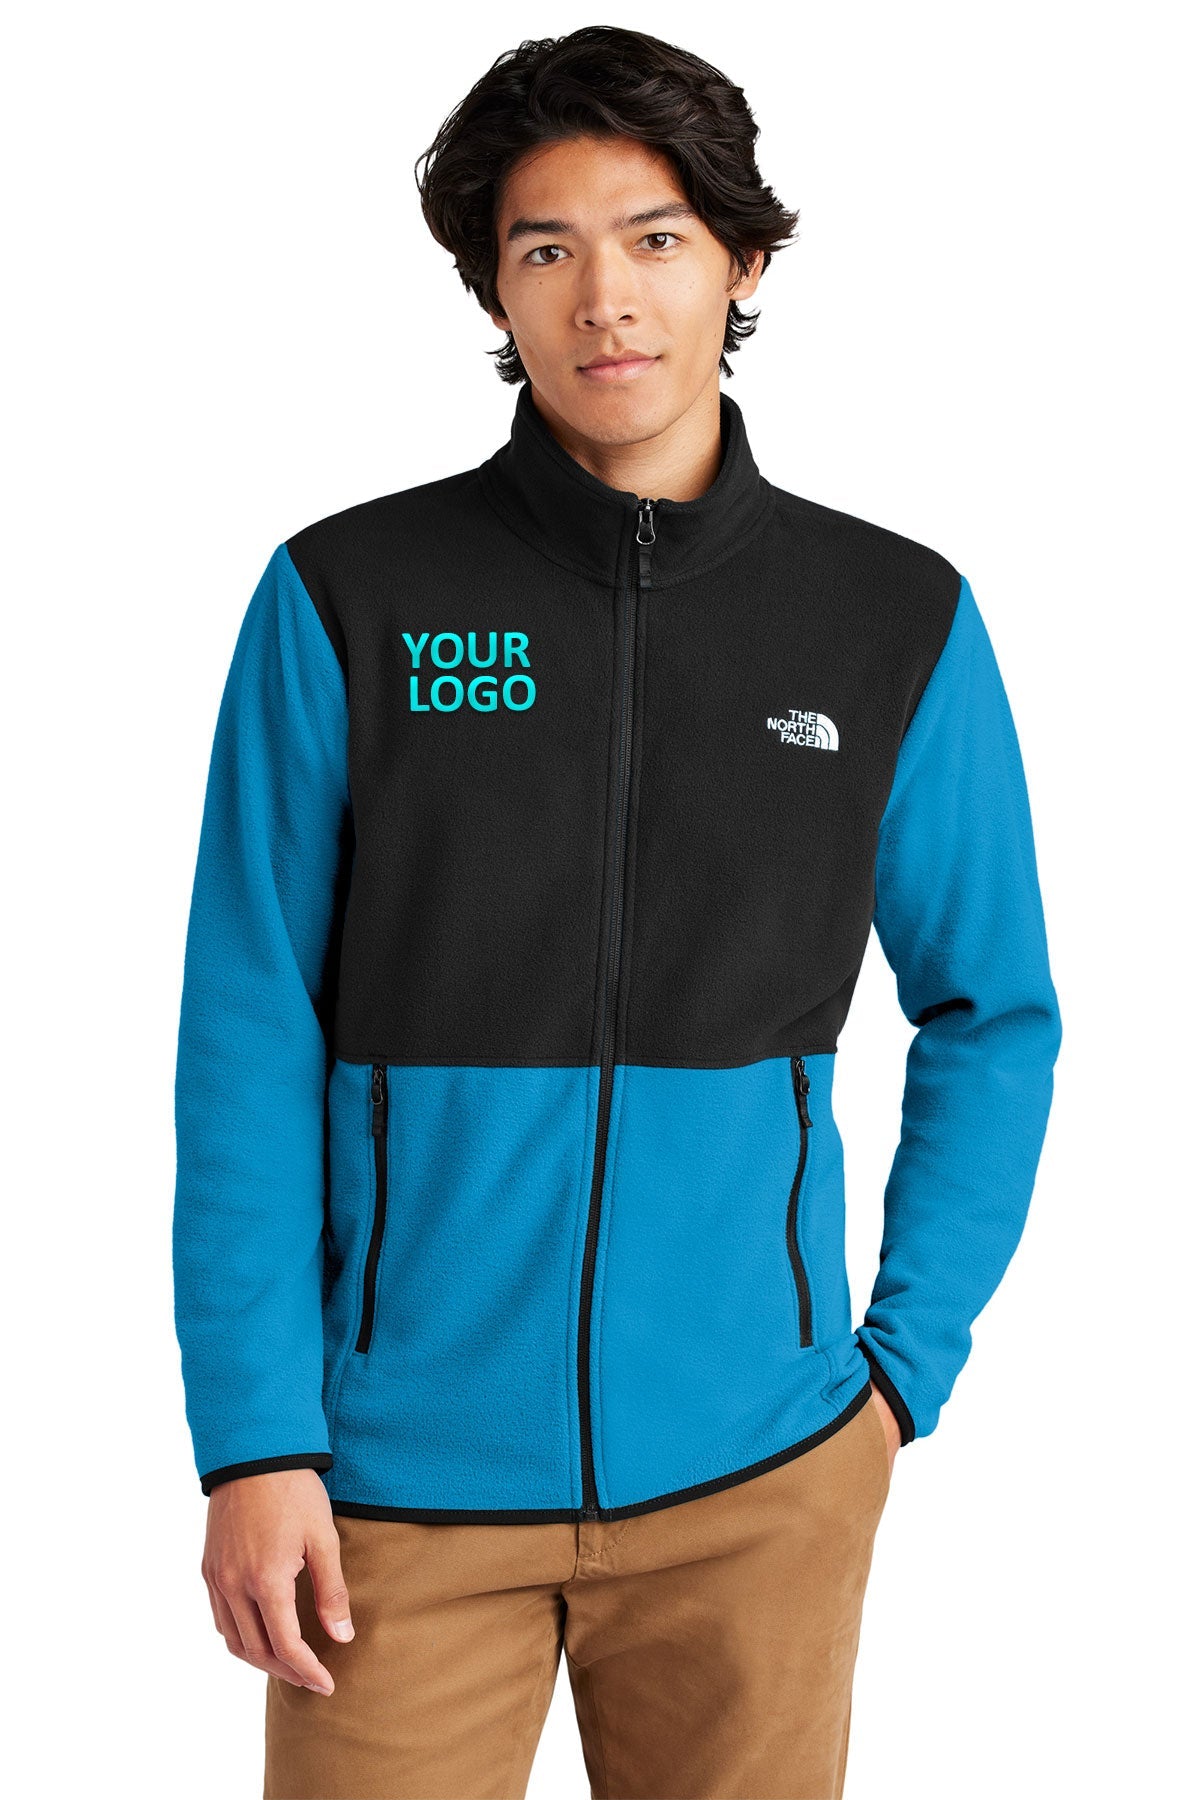 The North Face Hero Blue/ TNF Black NF0A7V4J company embroidered jackets